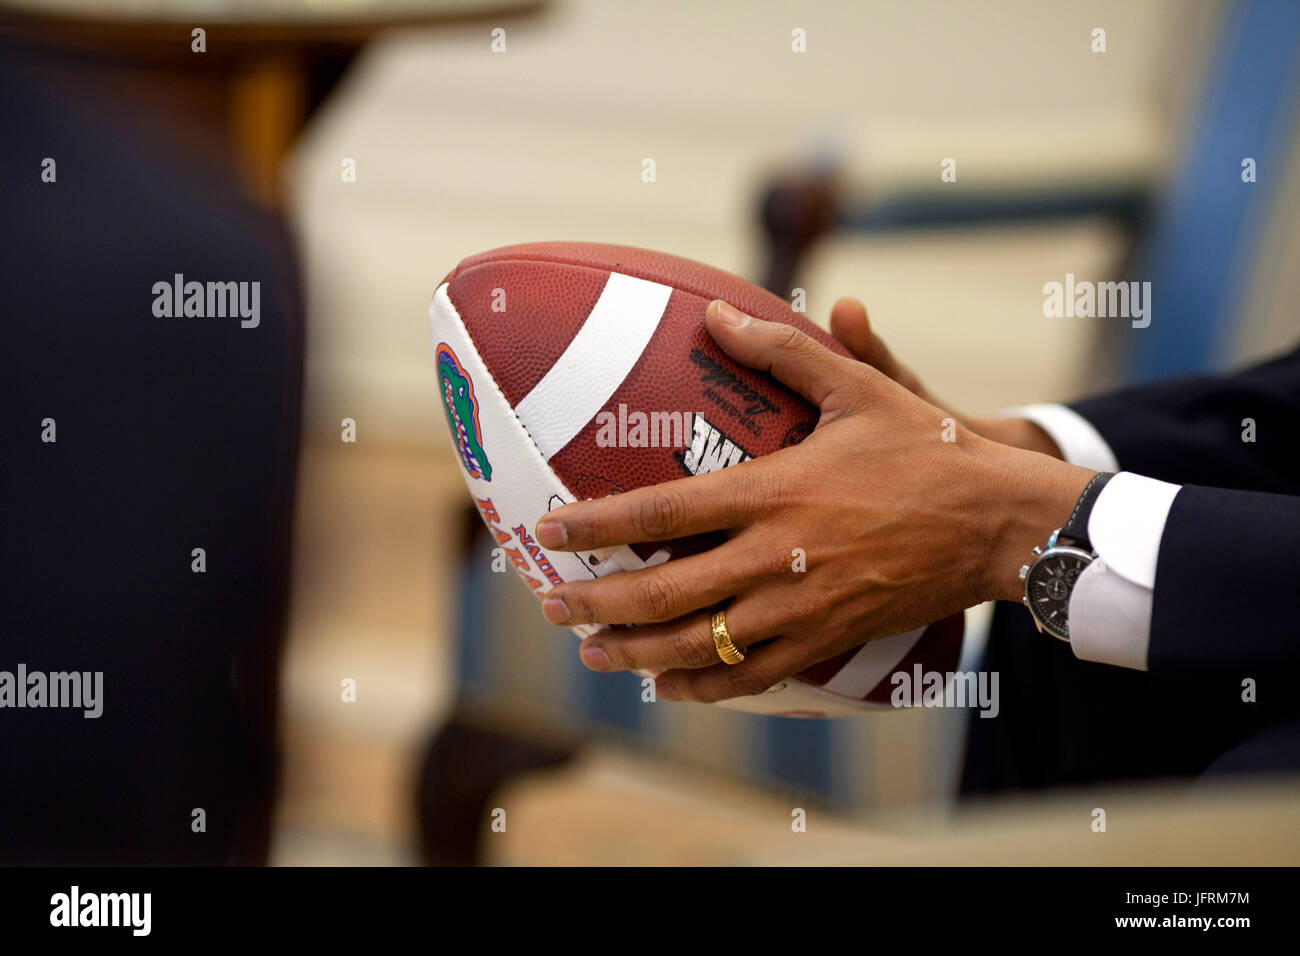 President Barack Obama holds a football during an Oval Office briefing for an upcoming healthcare meeting  May 11, 2009. Official White House Photo by Pete Souza.  This official White House photograph is being made available for publication by news organizations and/or for personal use printing by the subject(s) of the photograph. The photograph may not be manipulated or used in materials, advertisements, products, or promotions that in any way suggest approval or endorsement of the President, the First Family, or the White House. Stock Photo